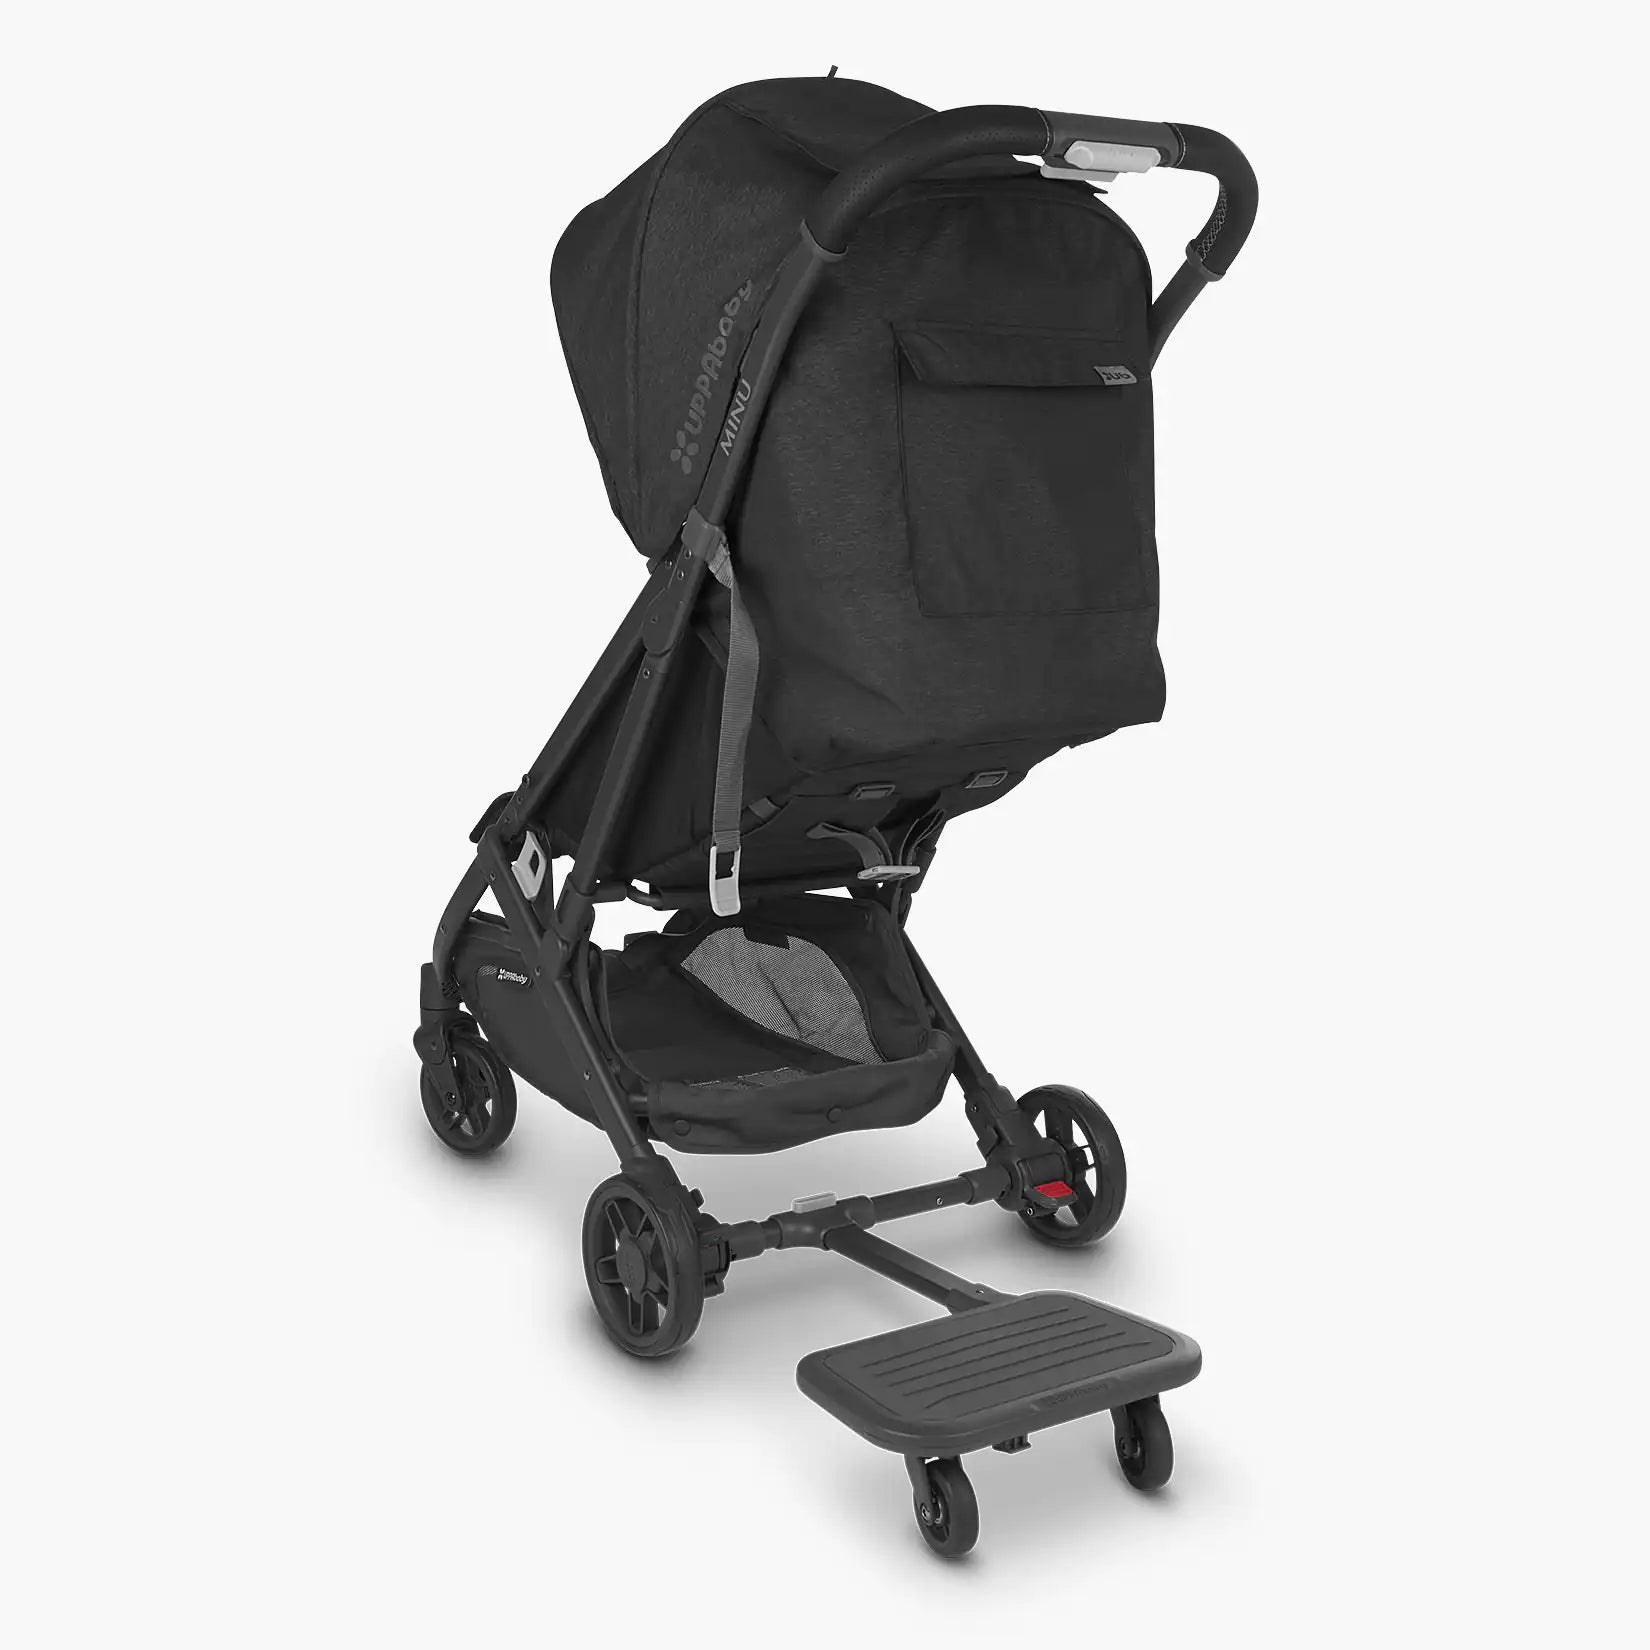 UPPAbaby PiggyBack For MINU And MINU 2 - ANB Baby -810030094104$75 - $100